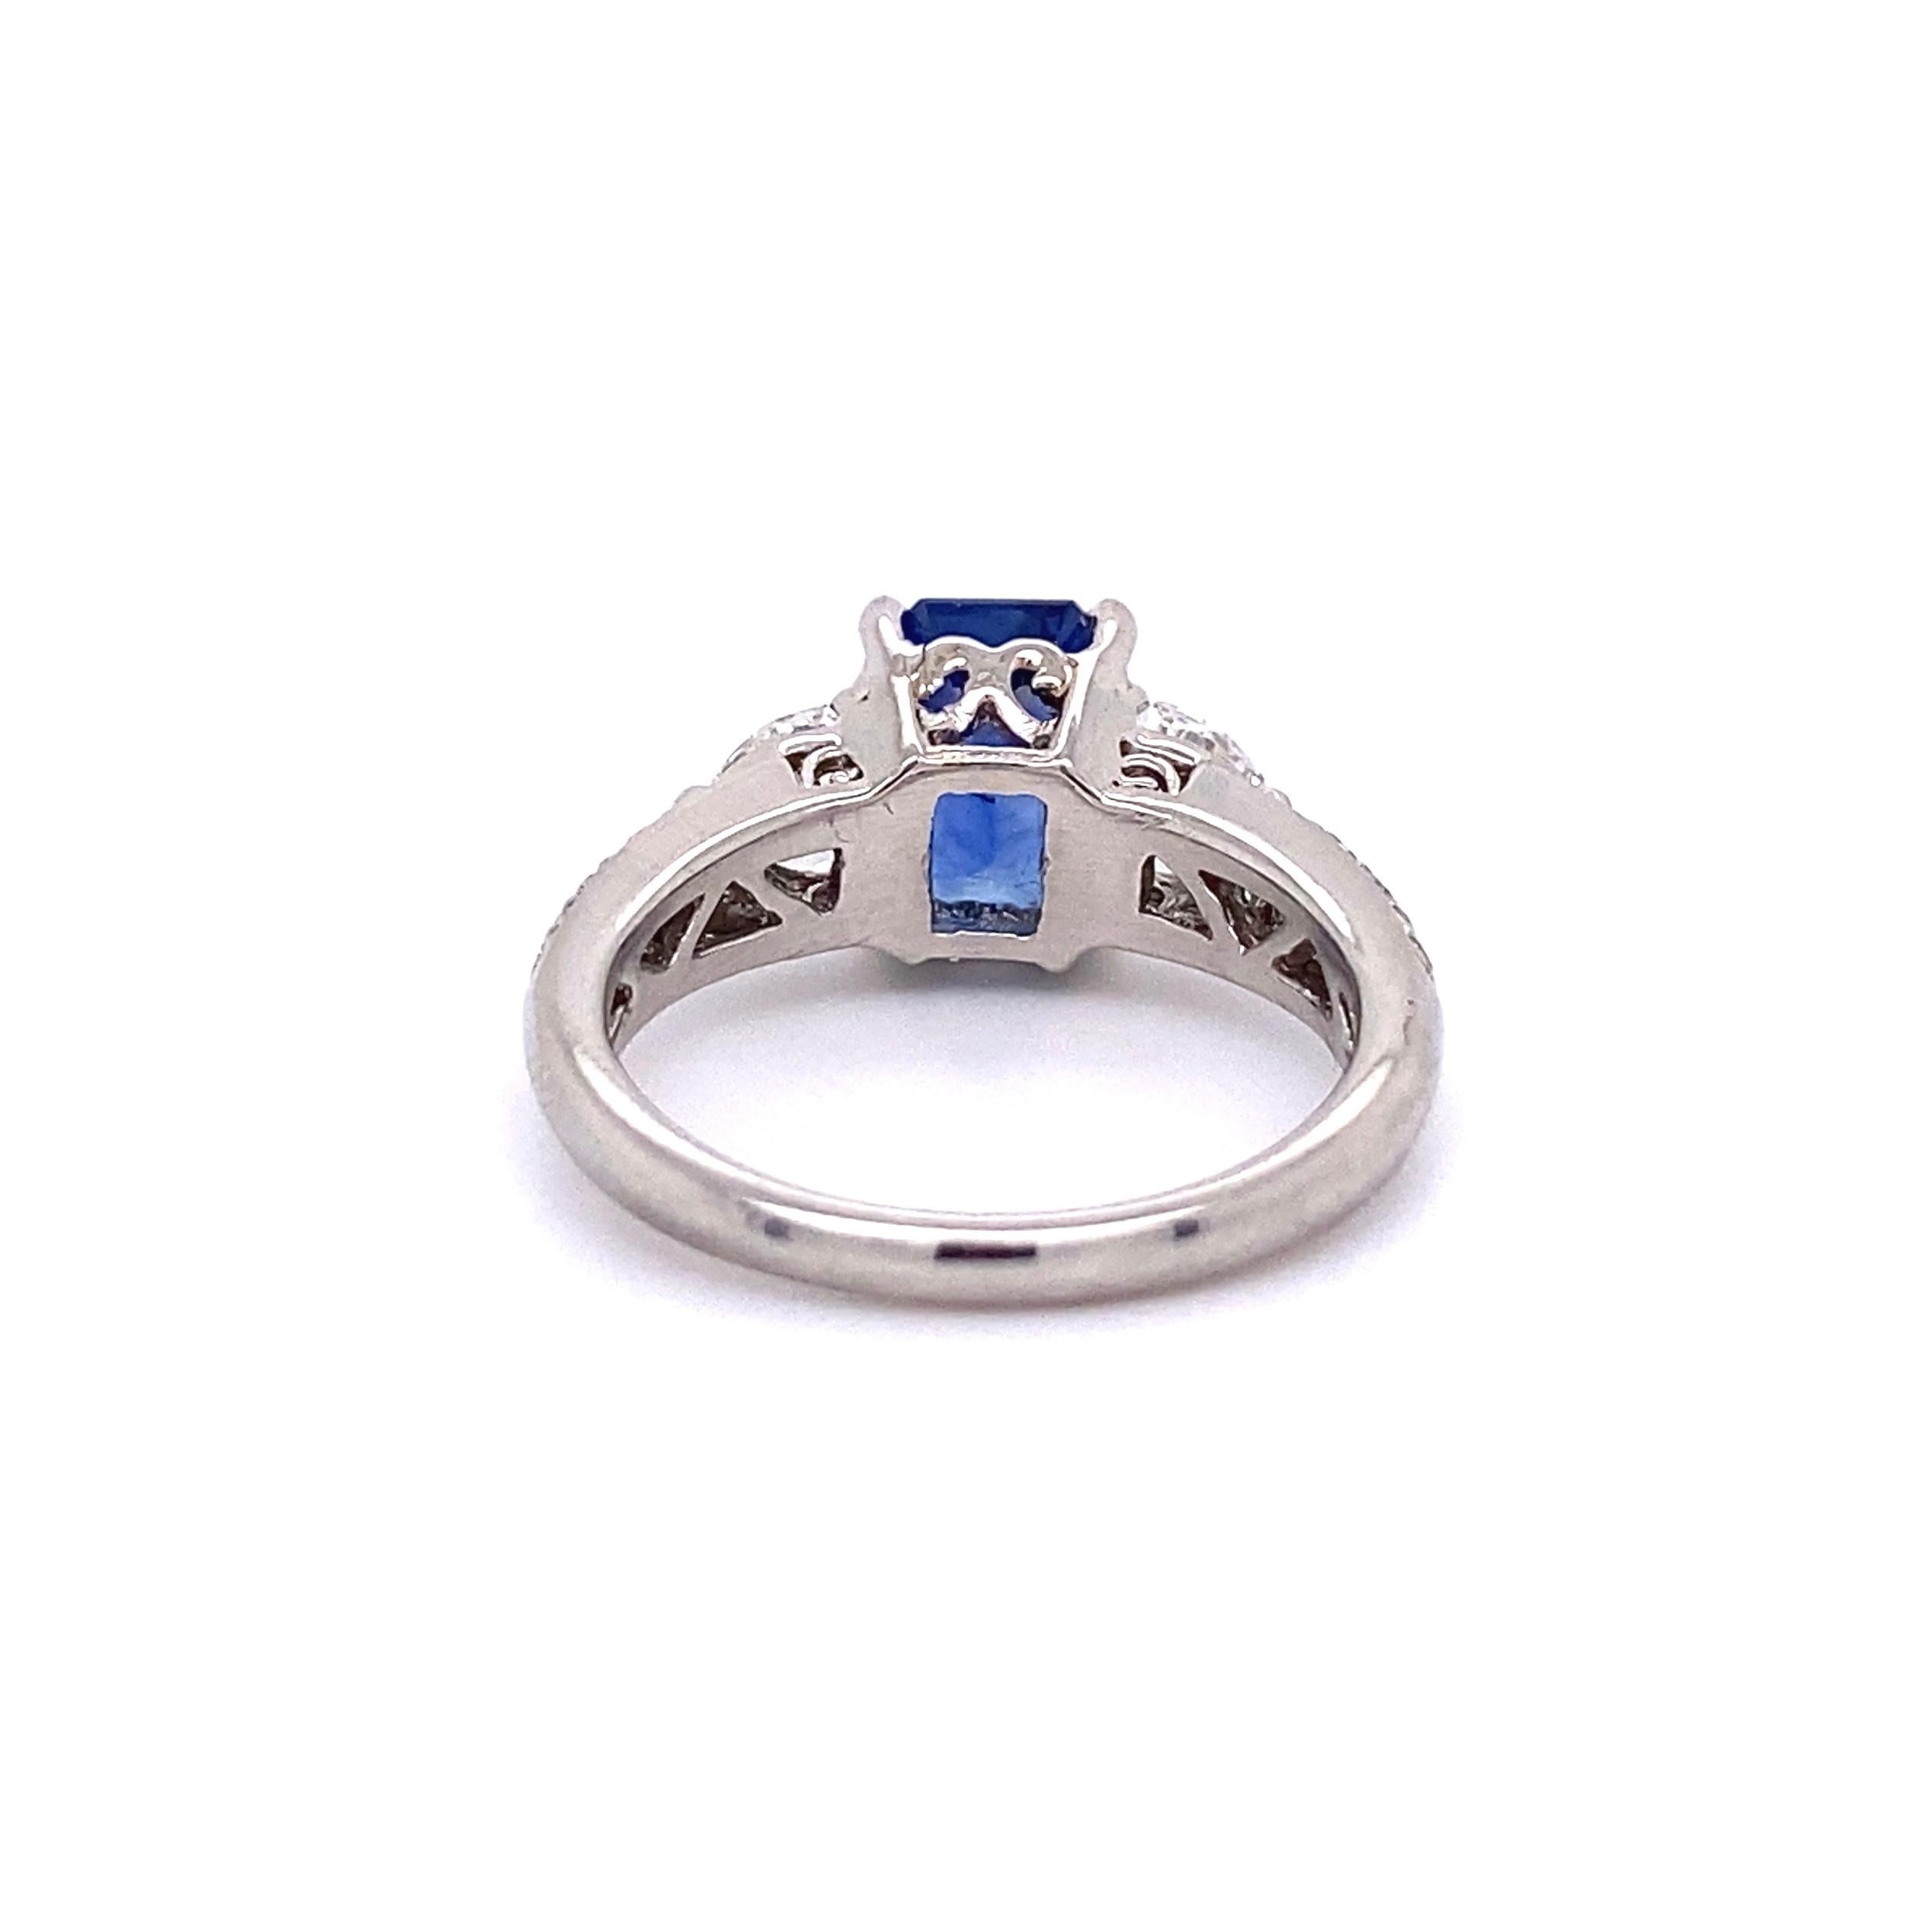 3.00 Carat Emerald Cut Sapphire and Diamond Platinum Ring Estate Fine Jewelry In Excellent Condition For Sale In Montreal, QC